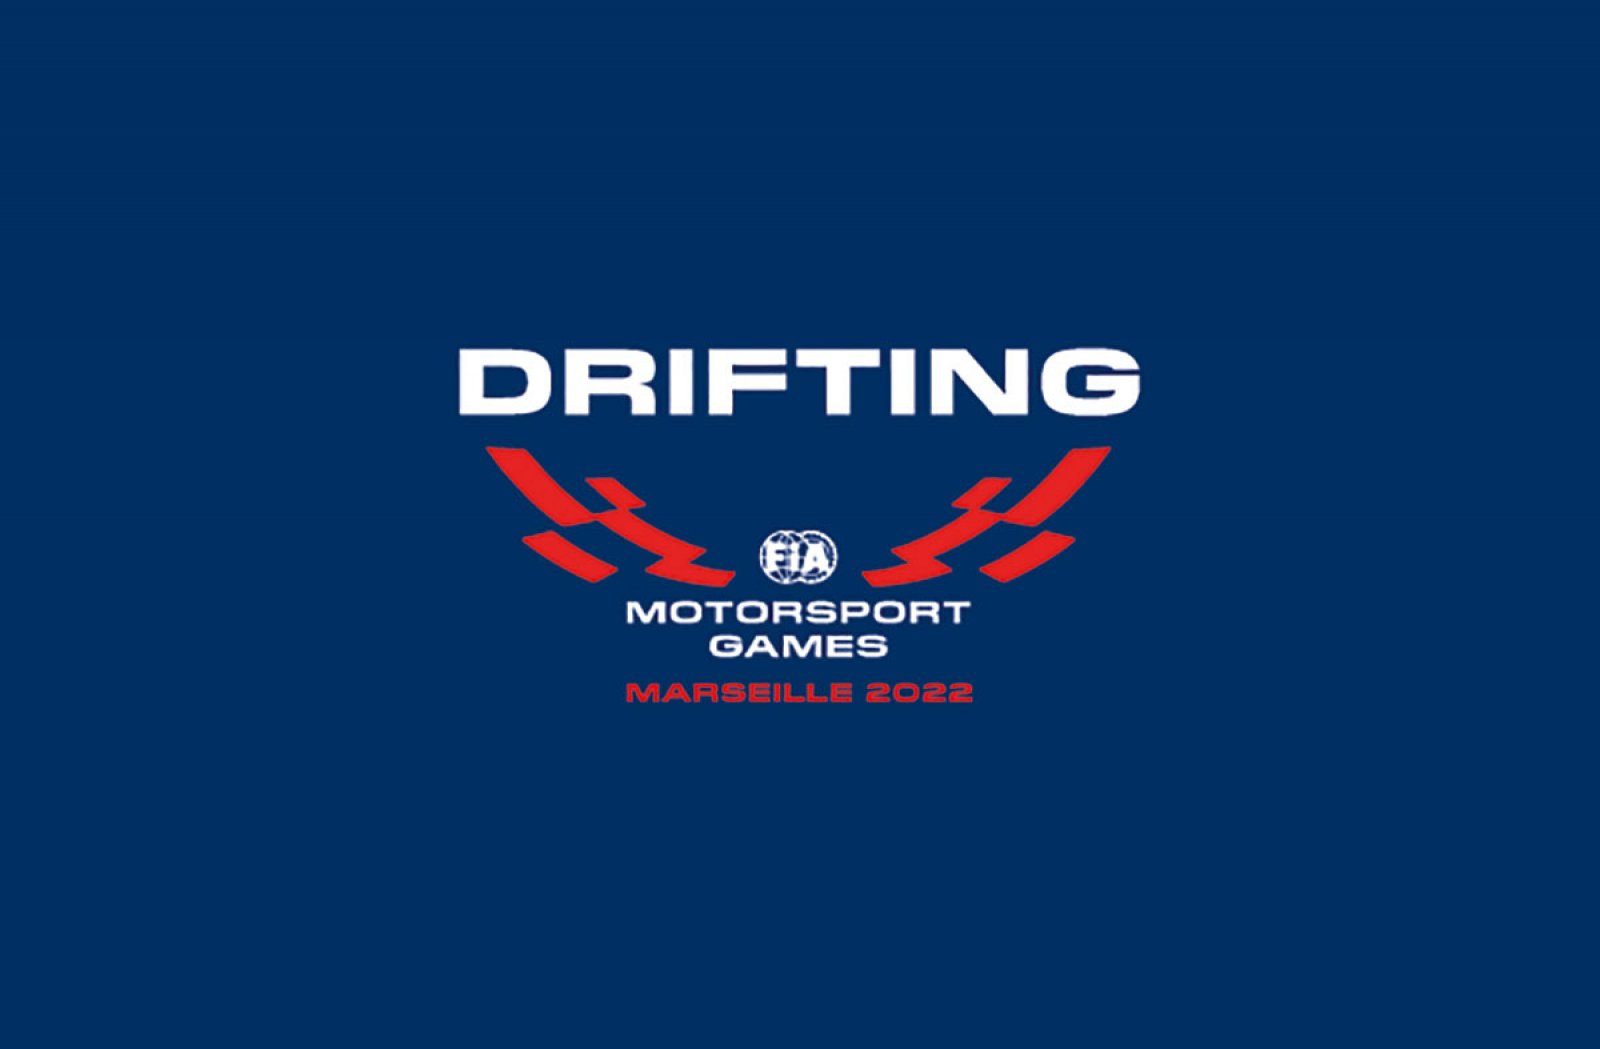 FIA Motorsport Games Preview: Drifting